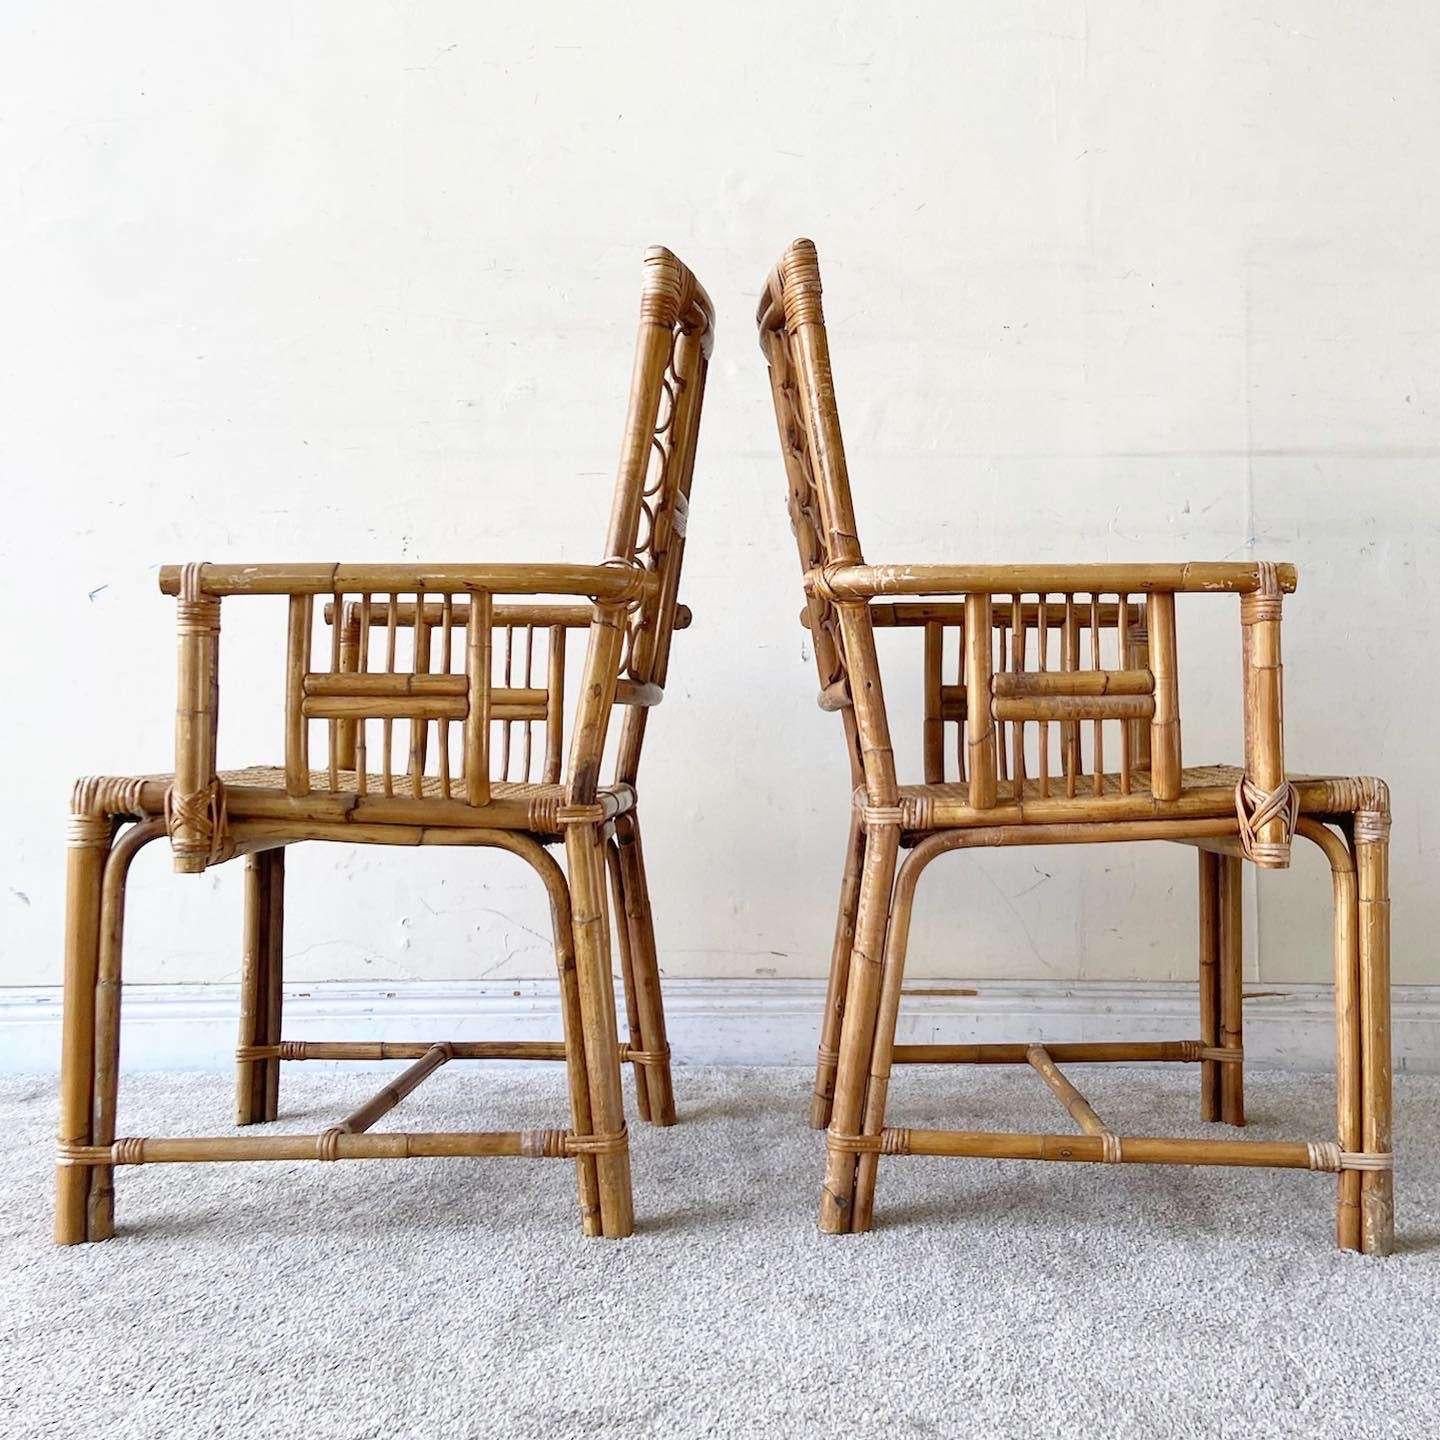 Boho Chic Bamboo Rattan and Cane Dining Chairs Attributed to Brighton - a Pair For Sale 3